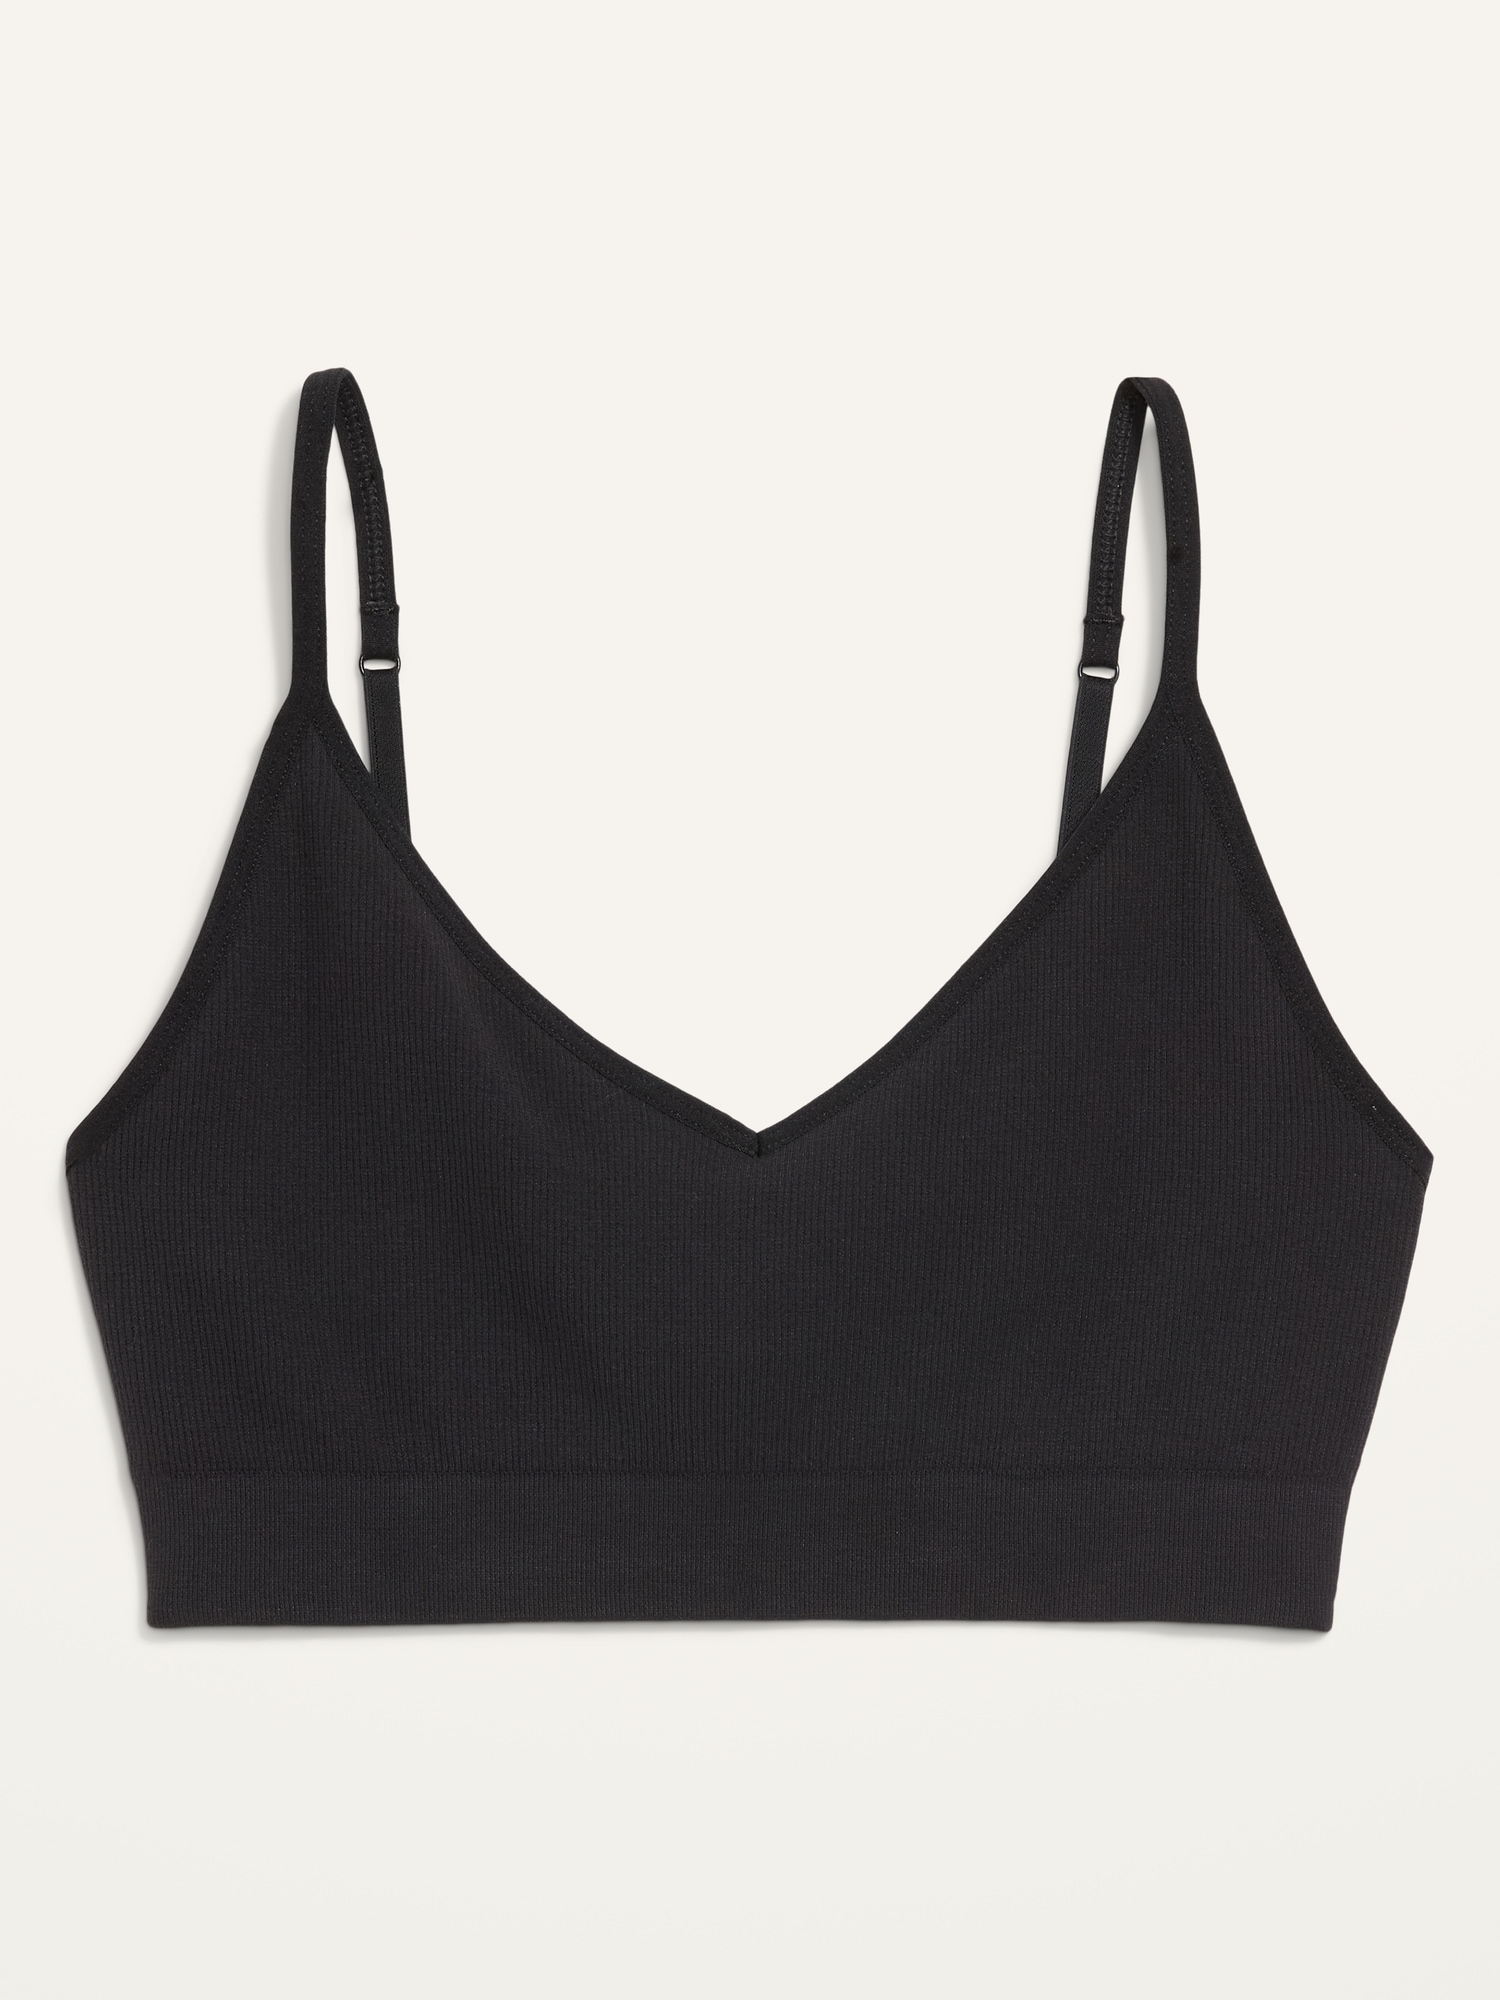 Seamless Lounge Bralette Top for Women XS-XXL | Old Navy